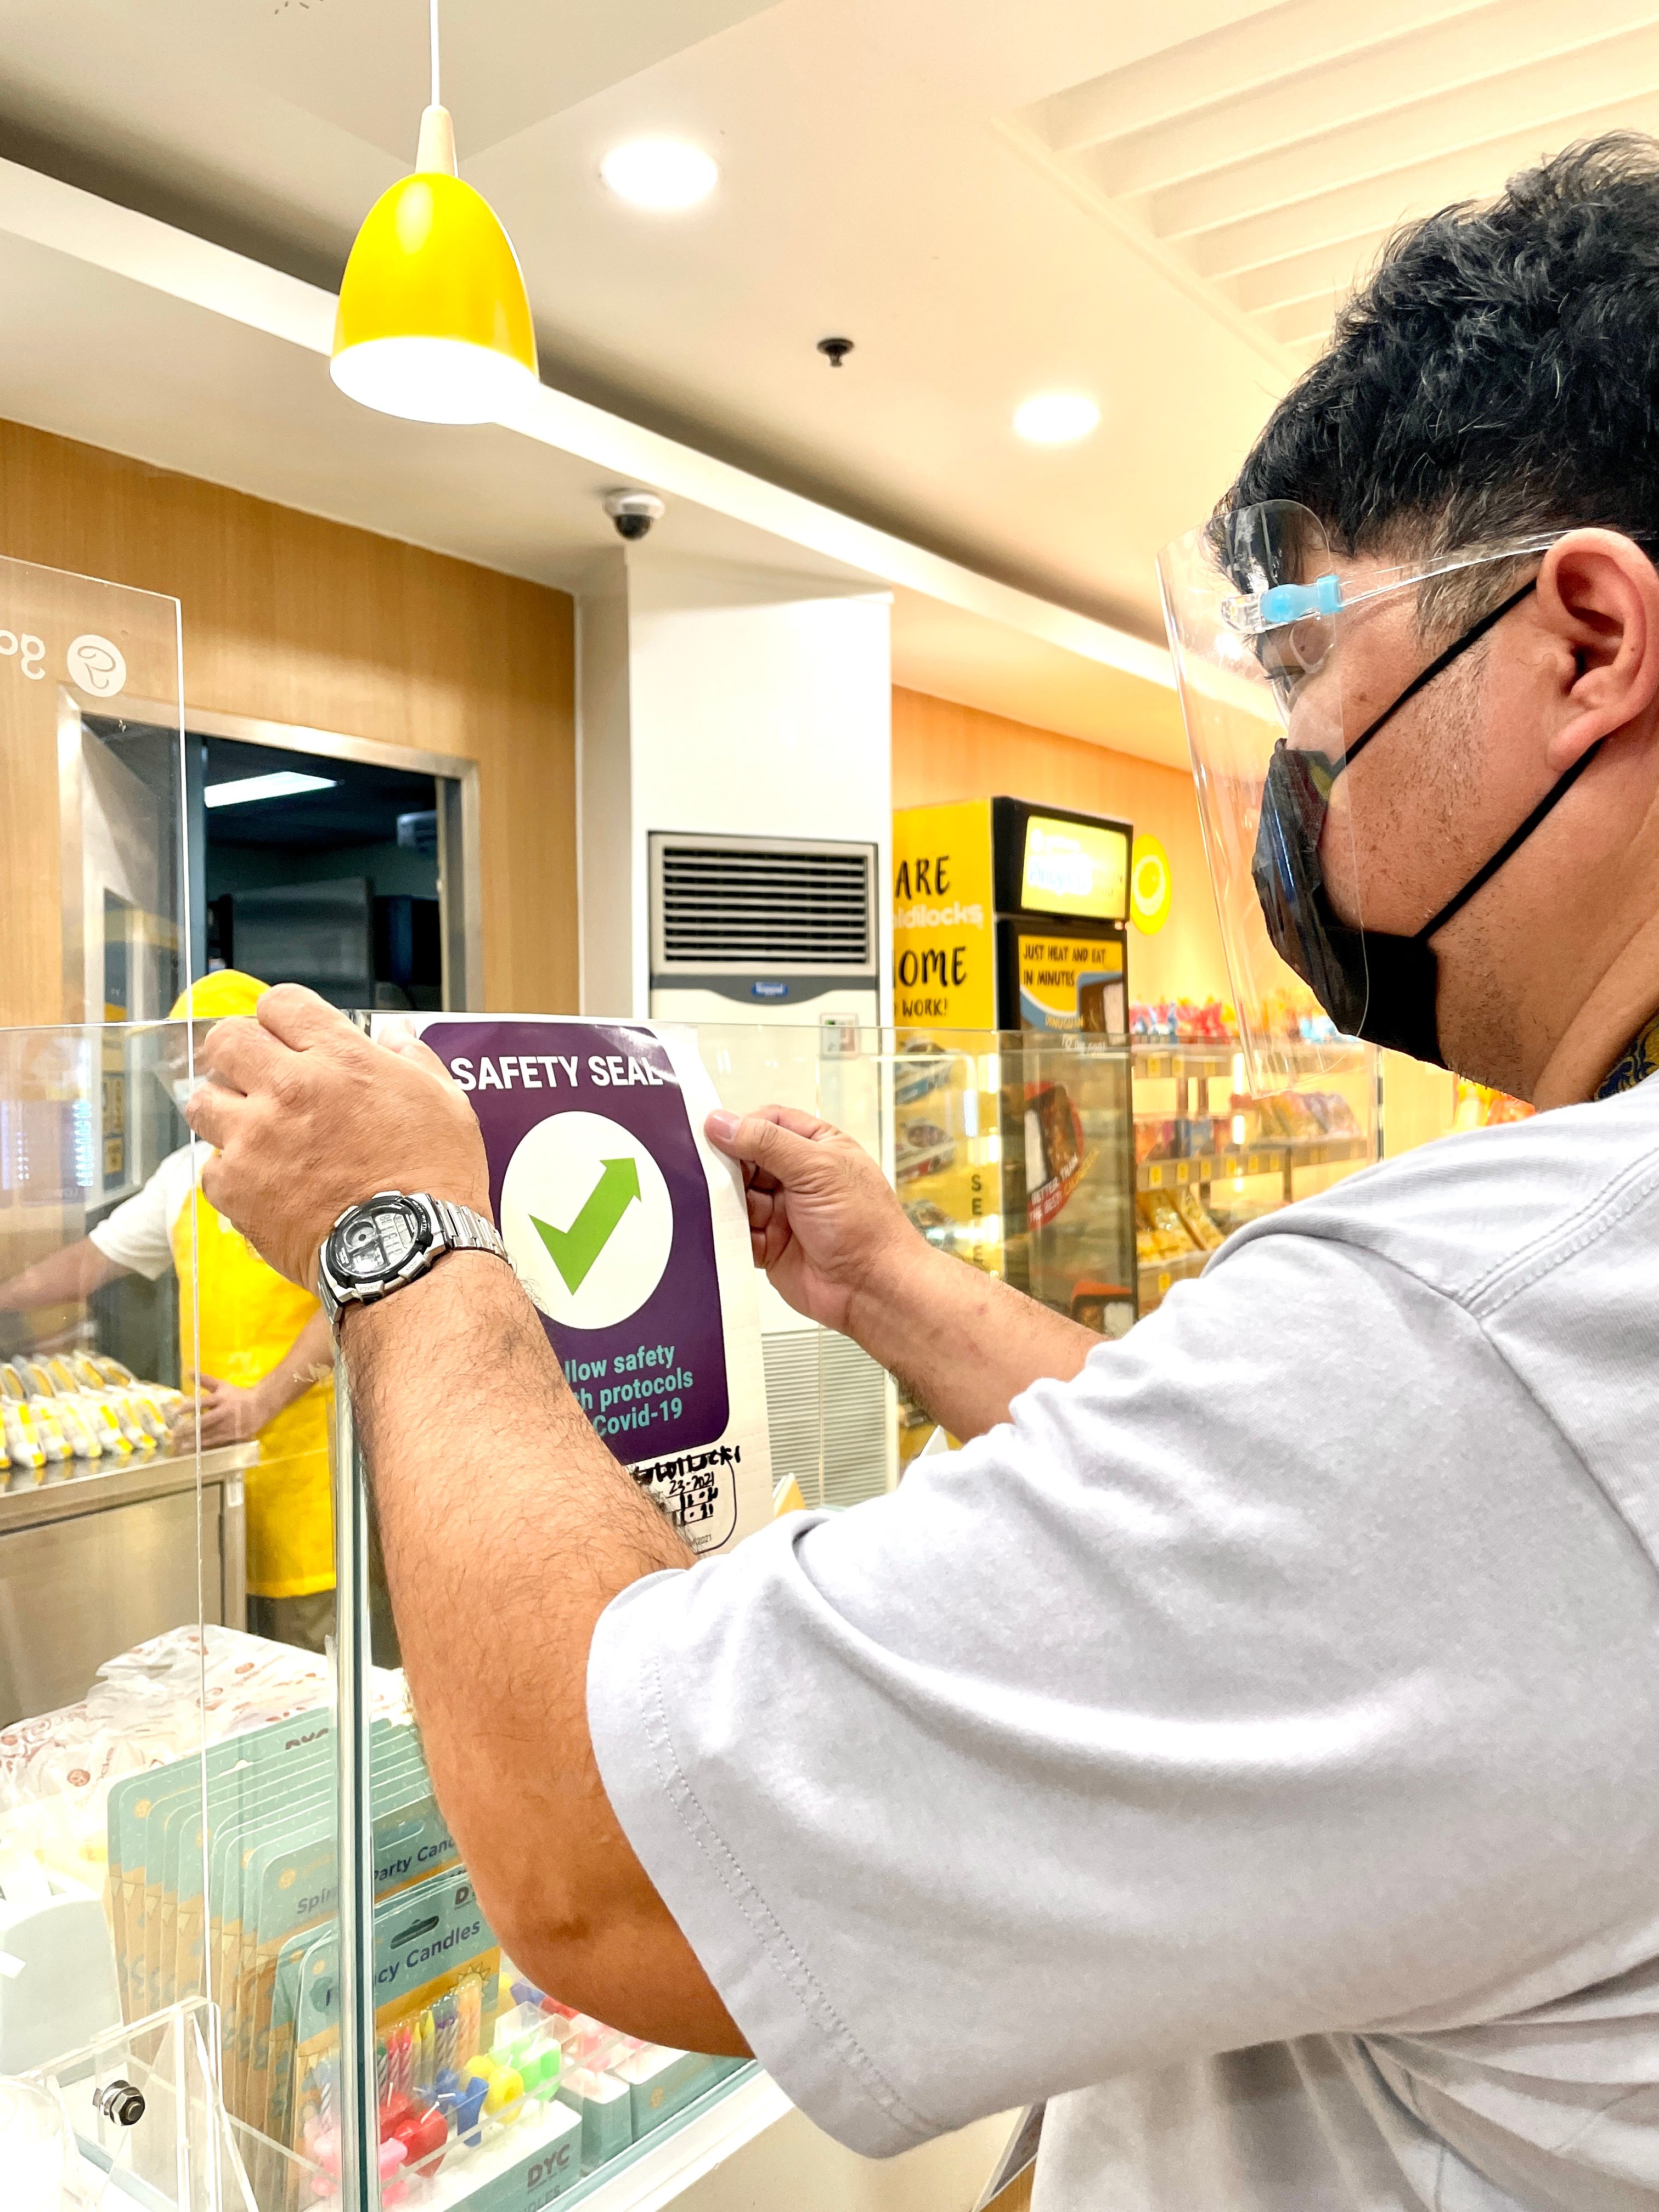 SM Megamall is first mall to receive Mandaluyong LGU Safety Seal